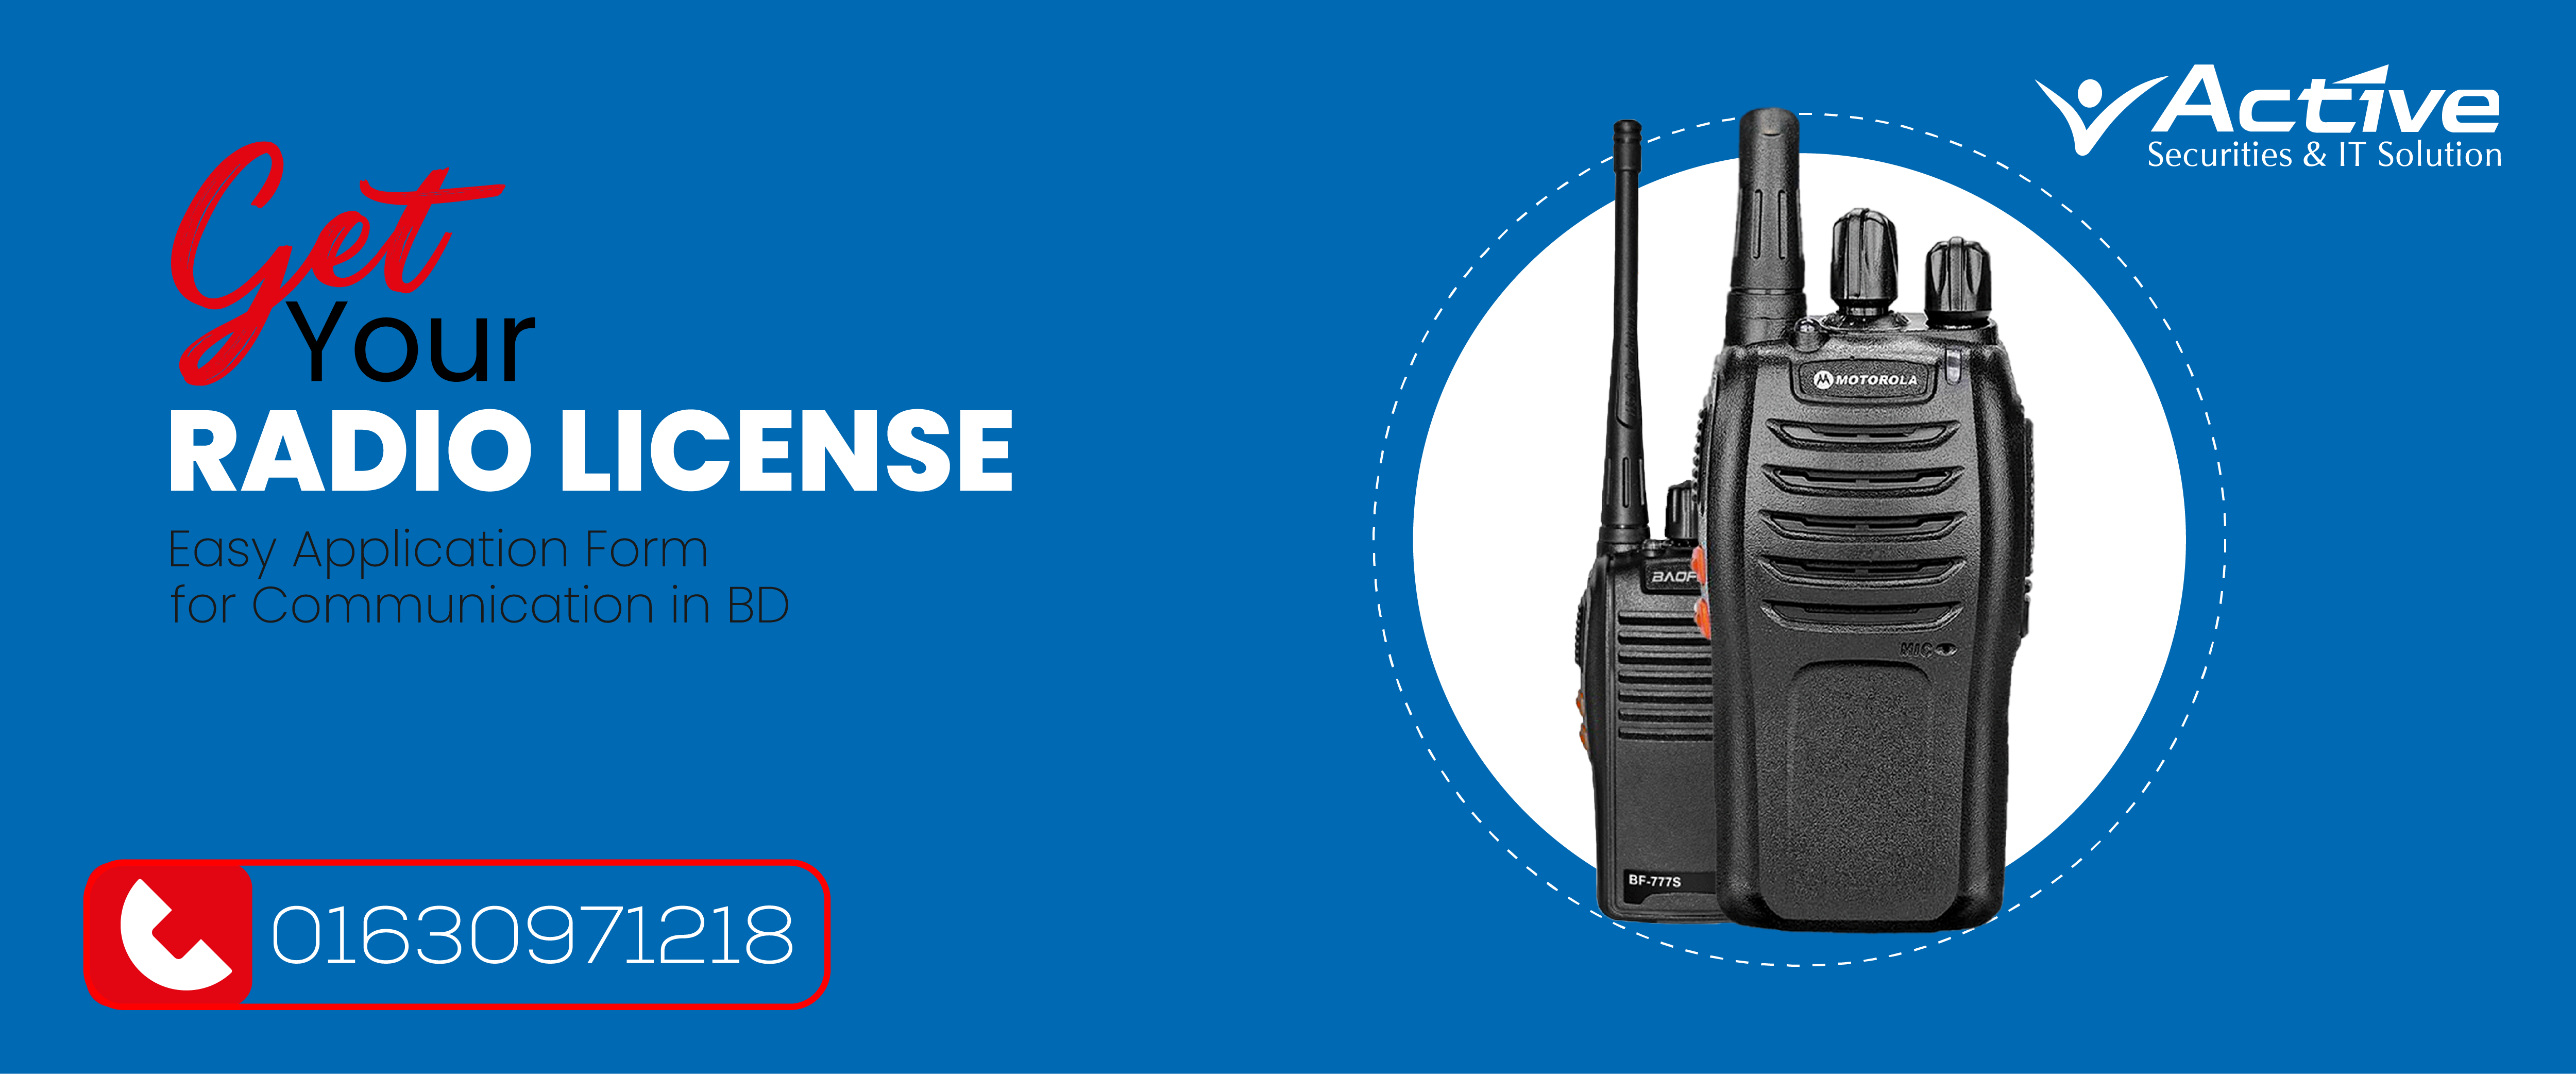 Get Your Radio License: Easy Application Form for Communication in BD